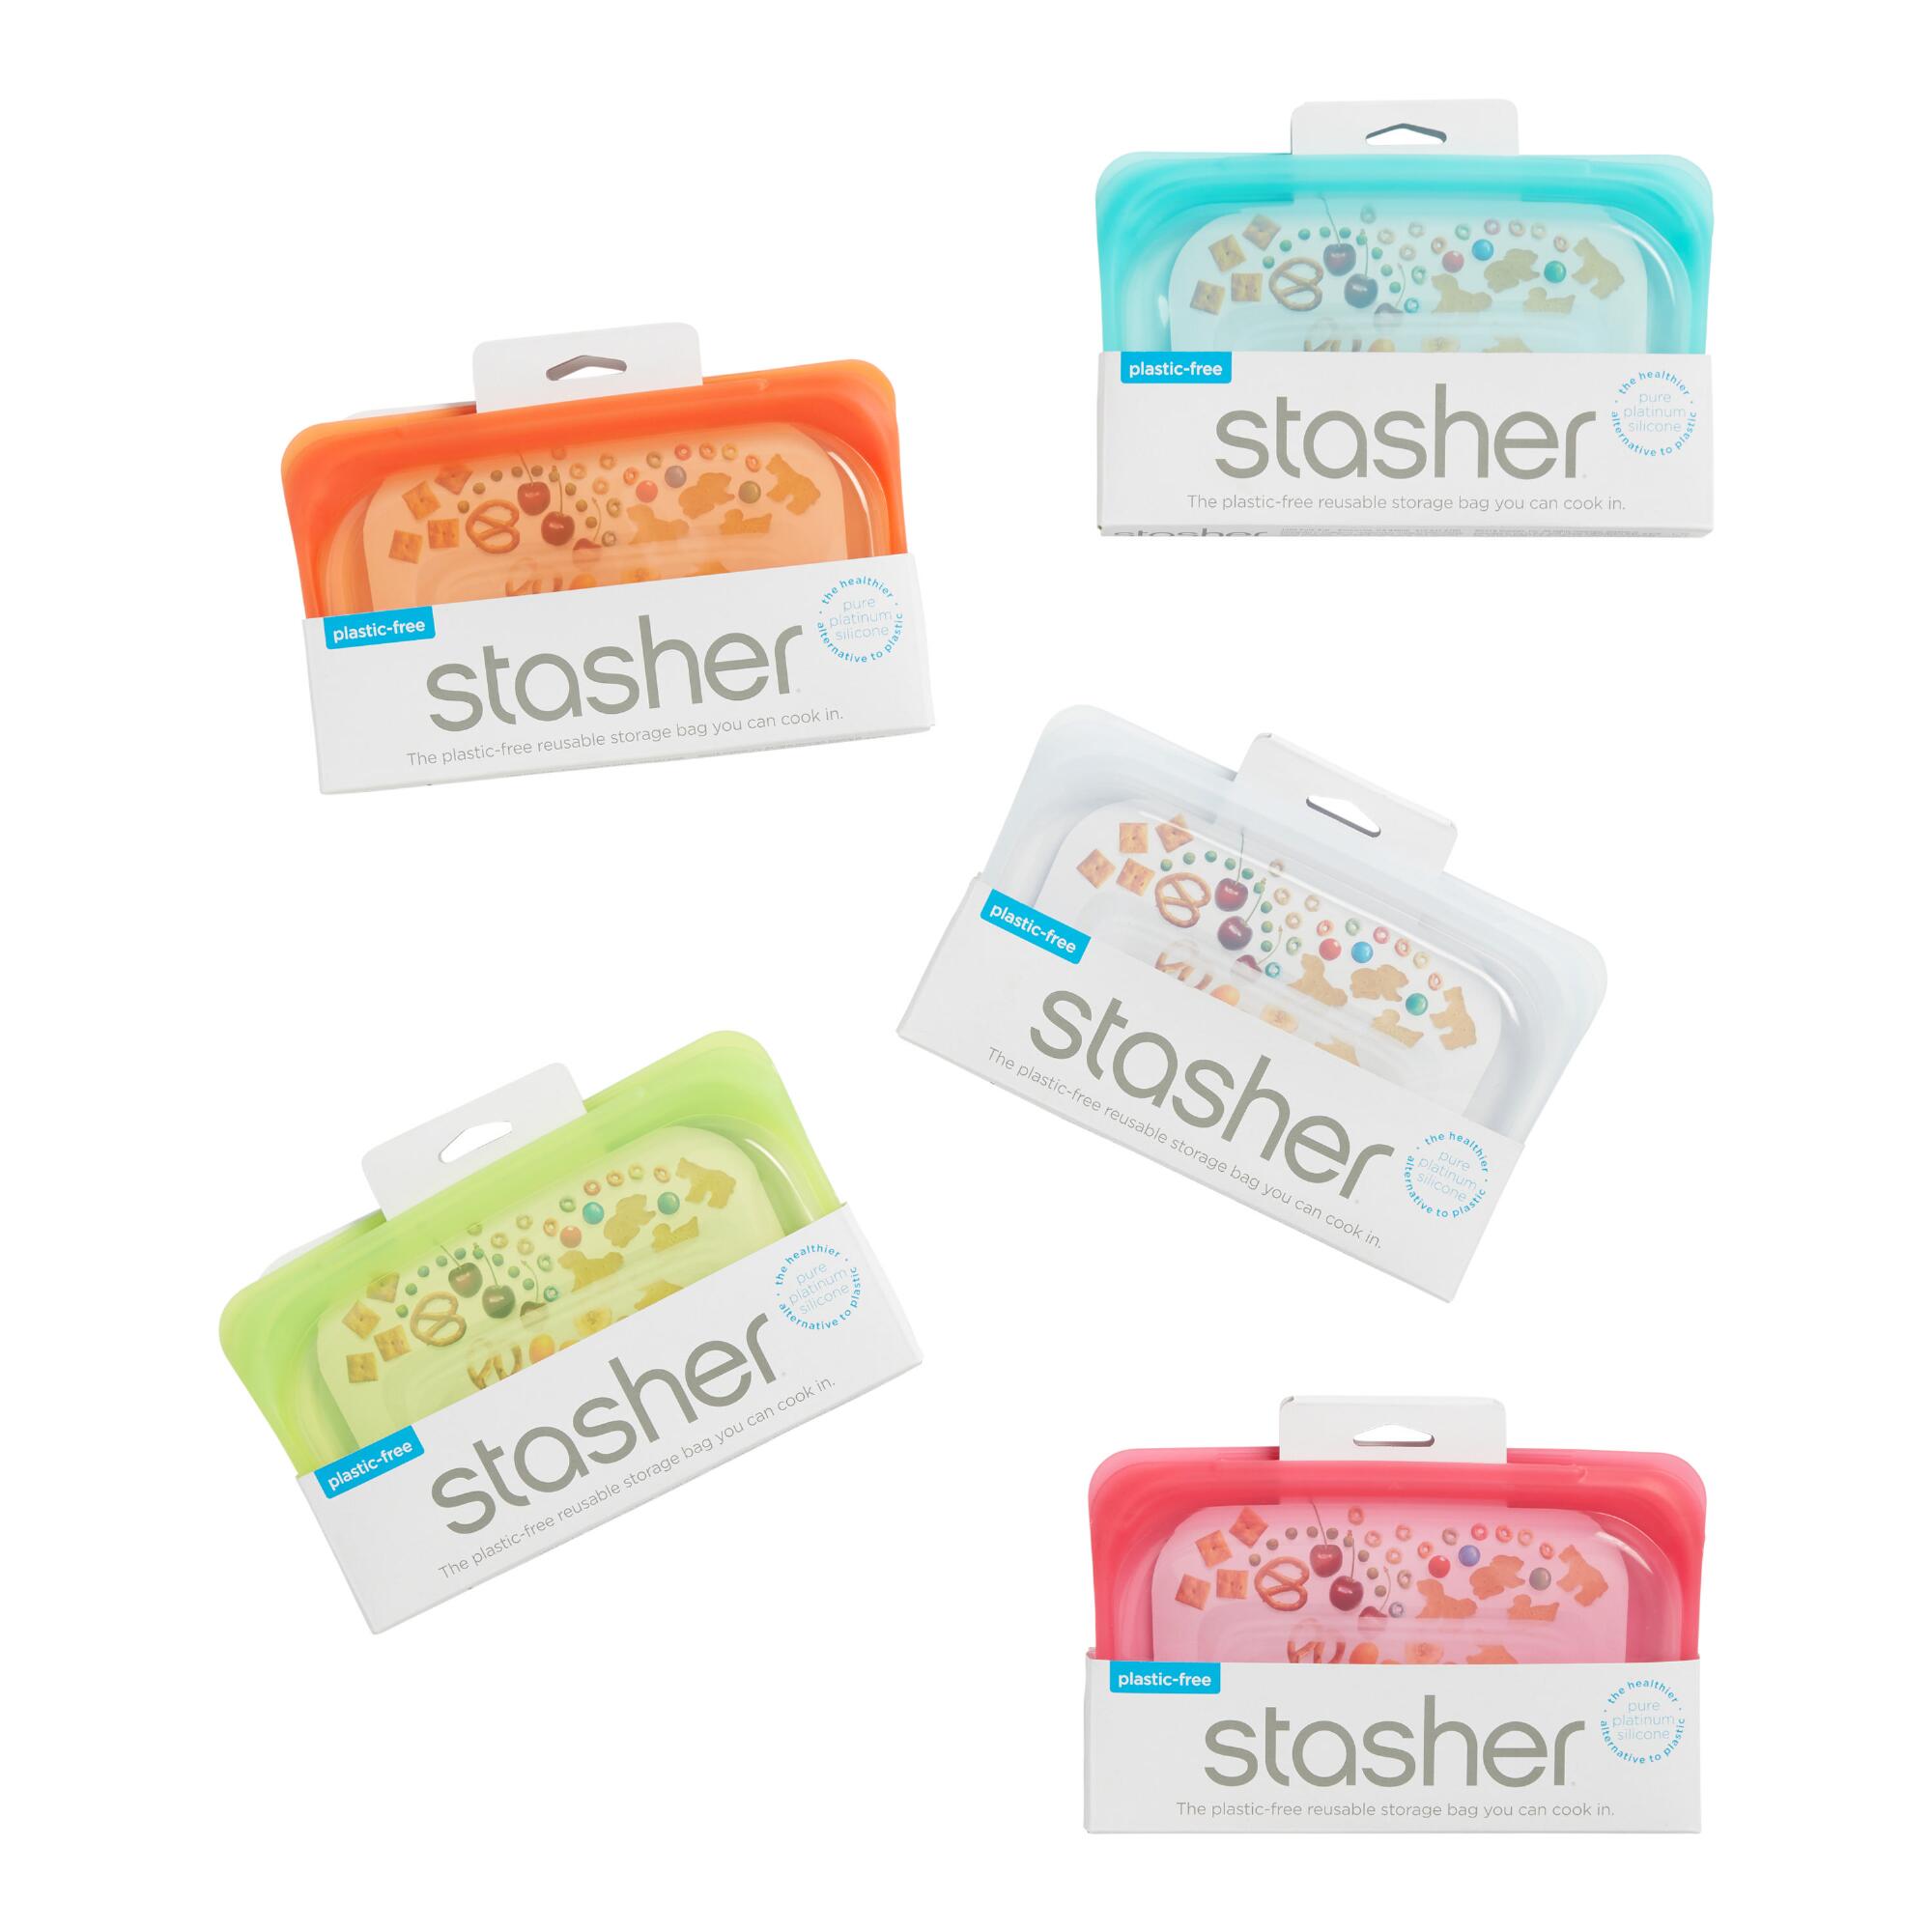 Stasher Reusable Silicone Snack Bags Set of 3 by World Market